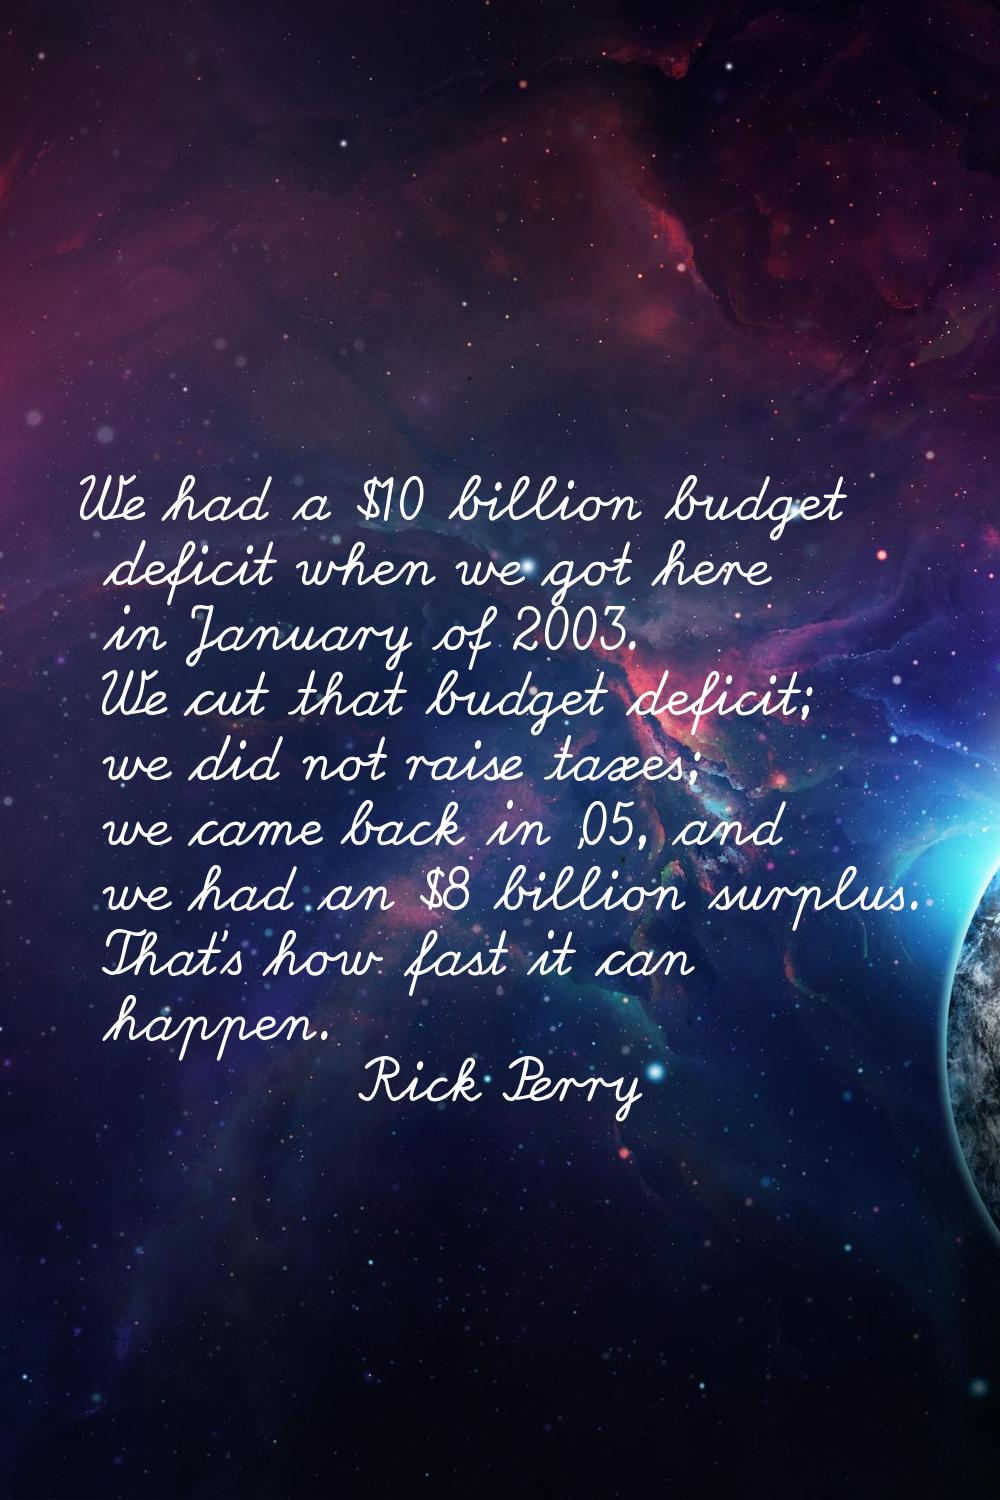 We had a $10 billion budget deficit when we got here in January of 2003. We cut that budget deficit